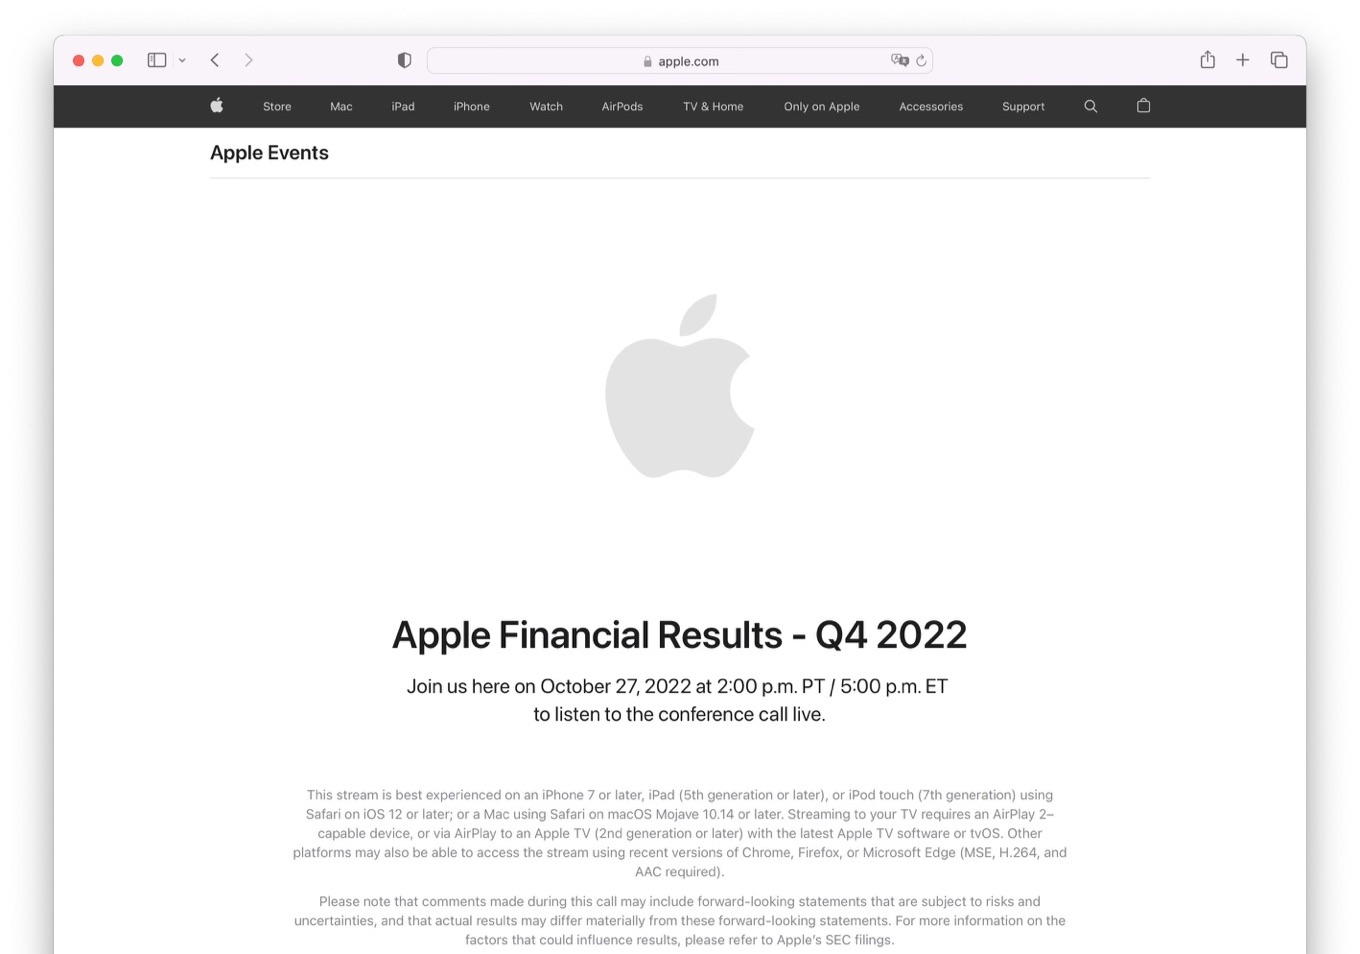 Apple Financial Results Q4 2022